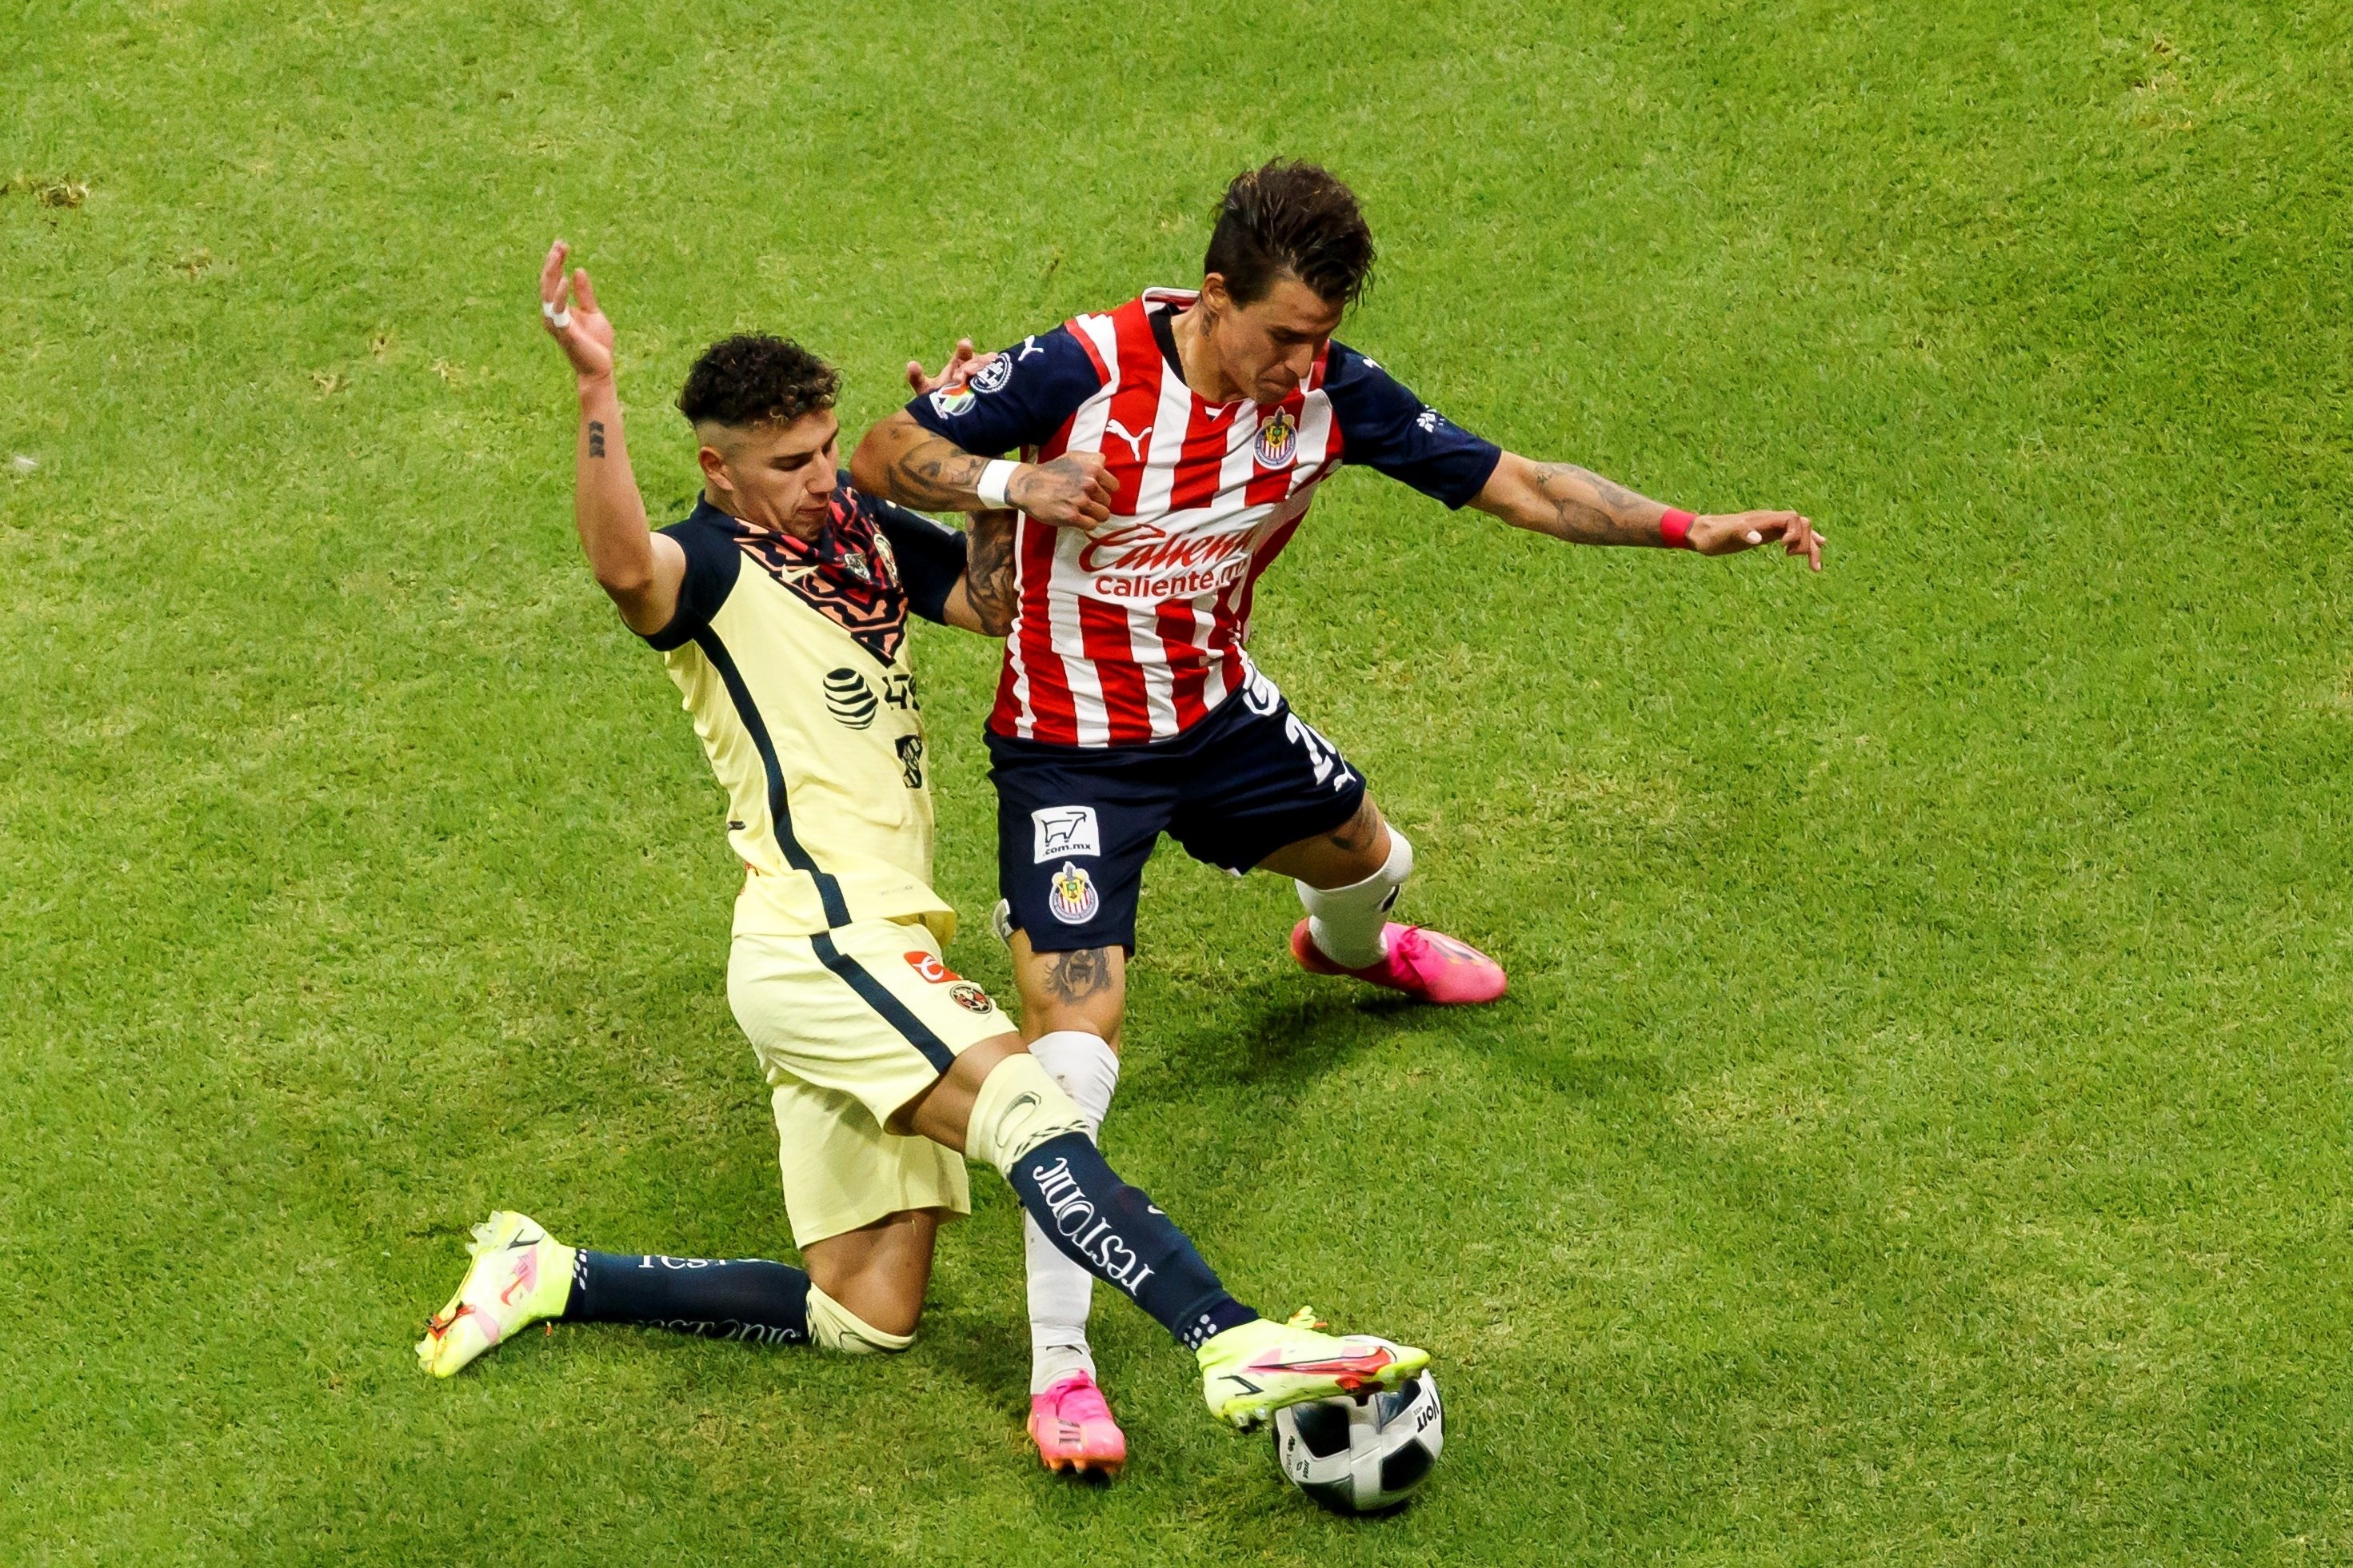 American player Jorge Sánchez (l) disputes the ball with Cristian Calderón (d) of Chivas today, during a match of the Mexican soccer opening tournament at the Azteca stadium in Mexico City (Mexico).  EFE/José Mendez